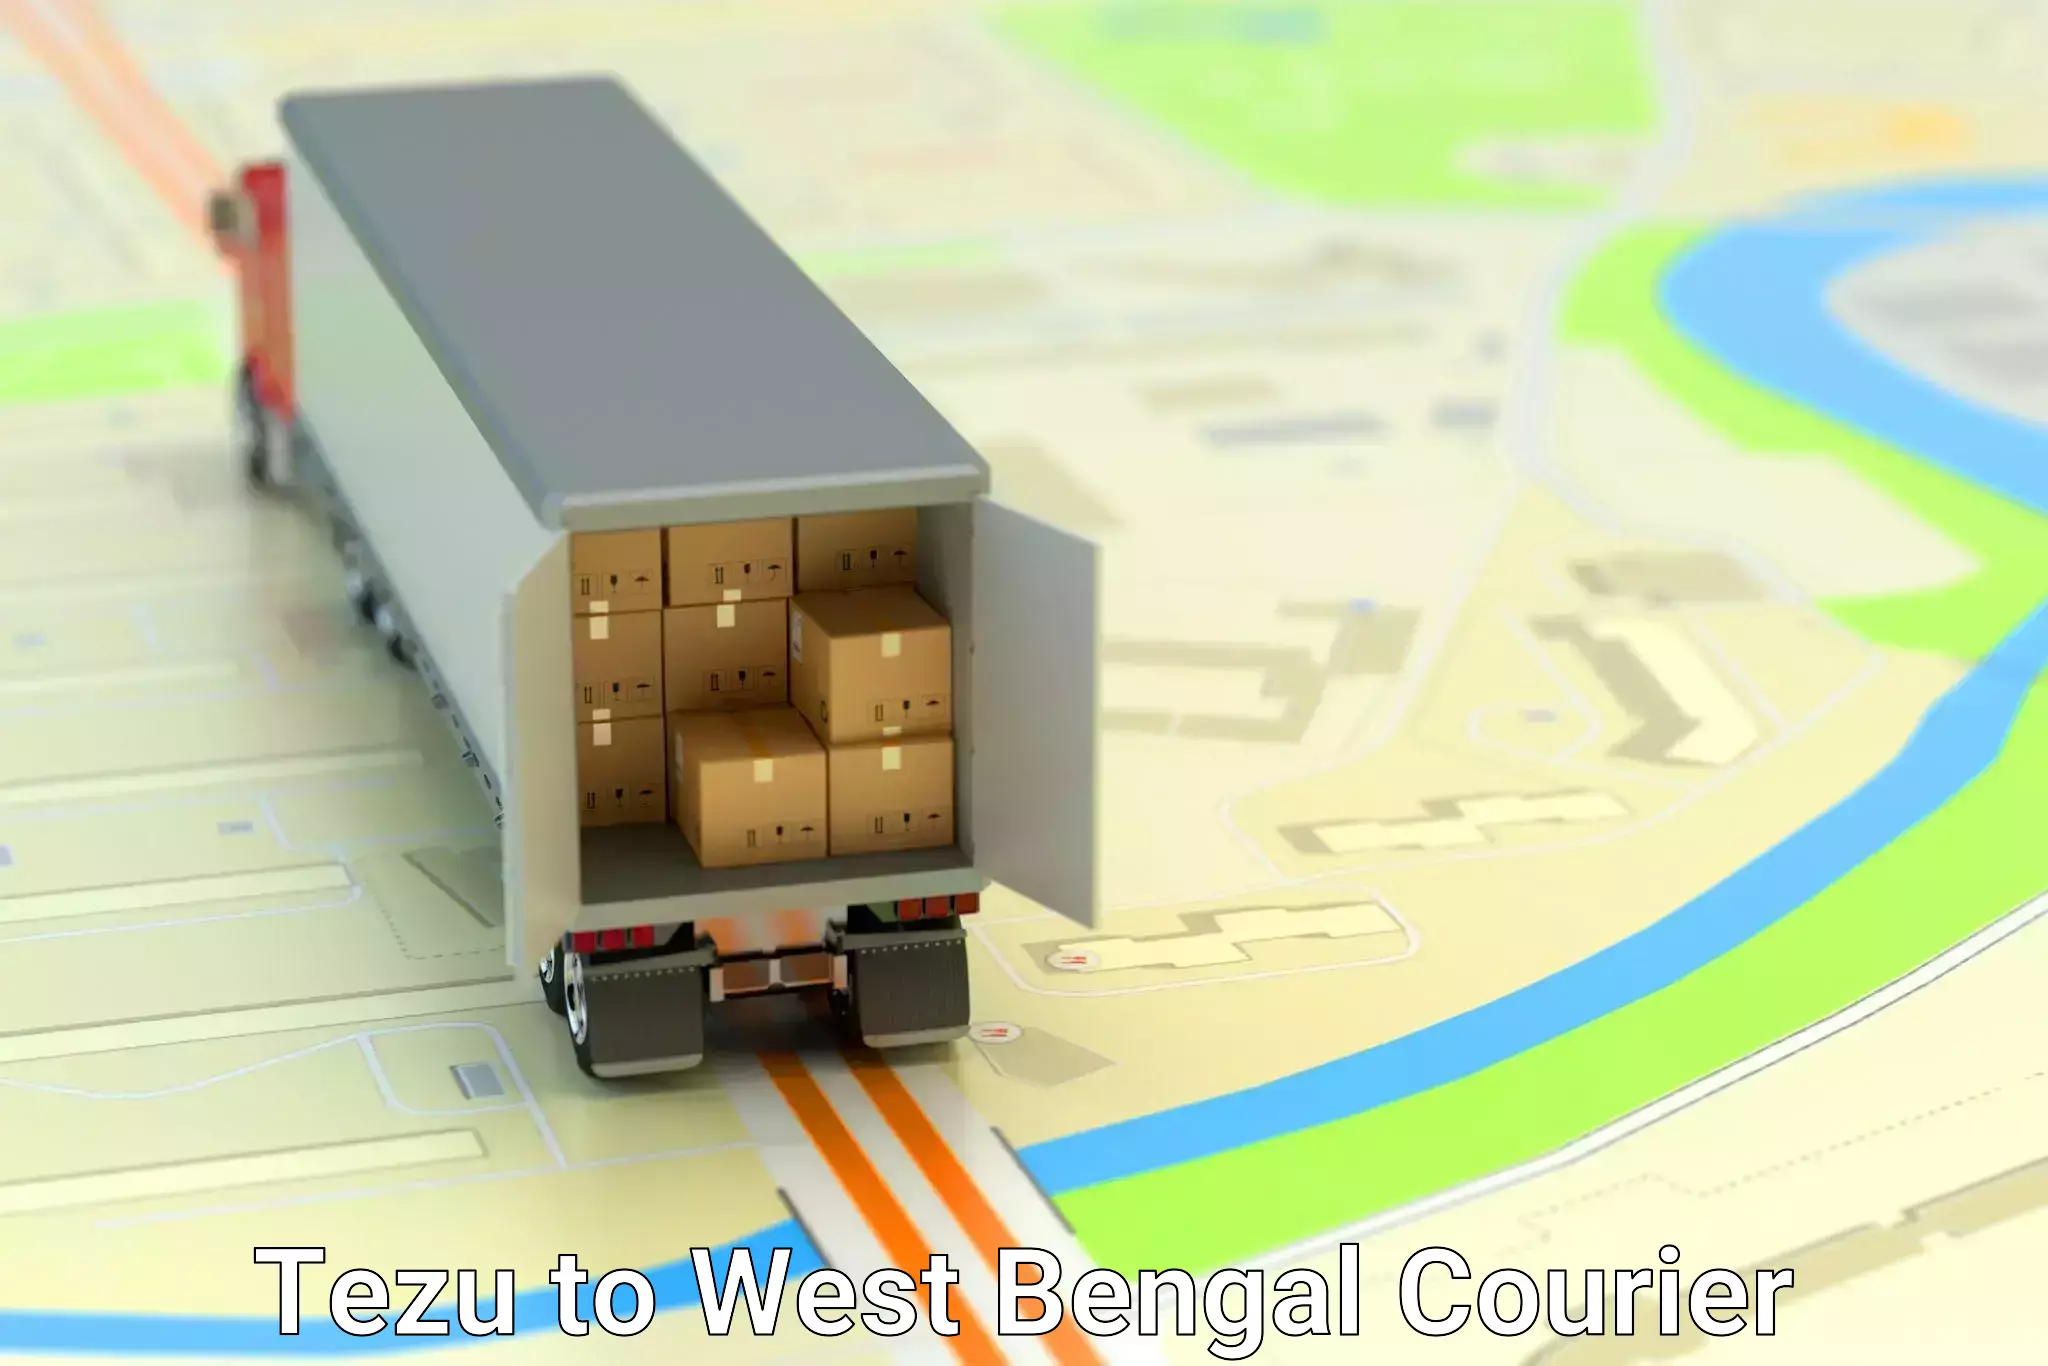 Package delivery network Tezu to Kolkata Port